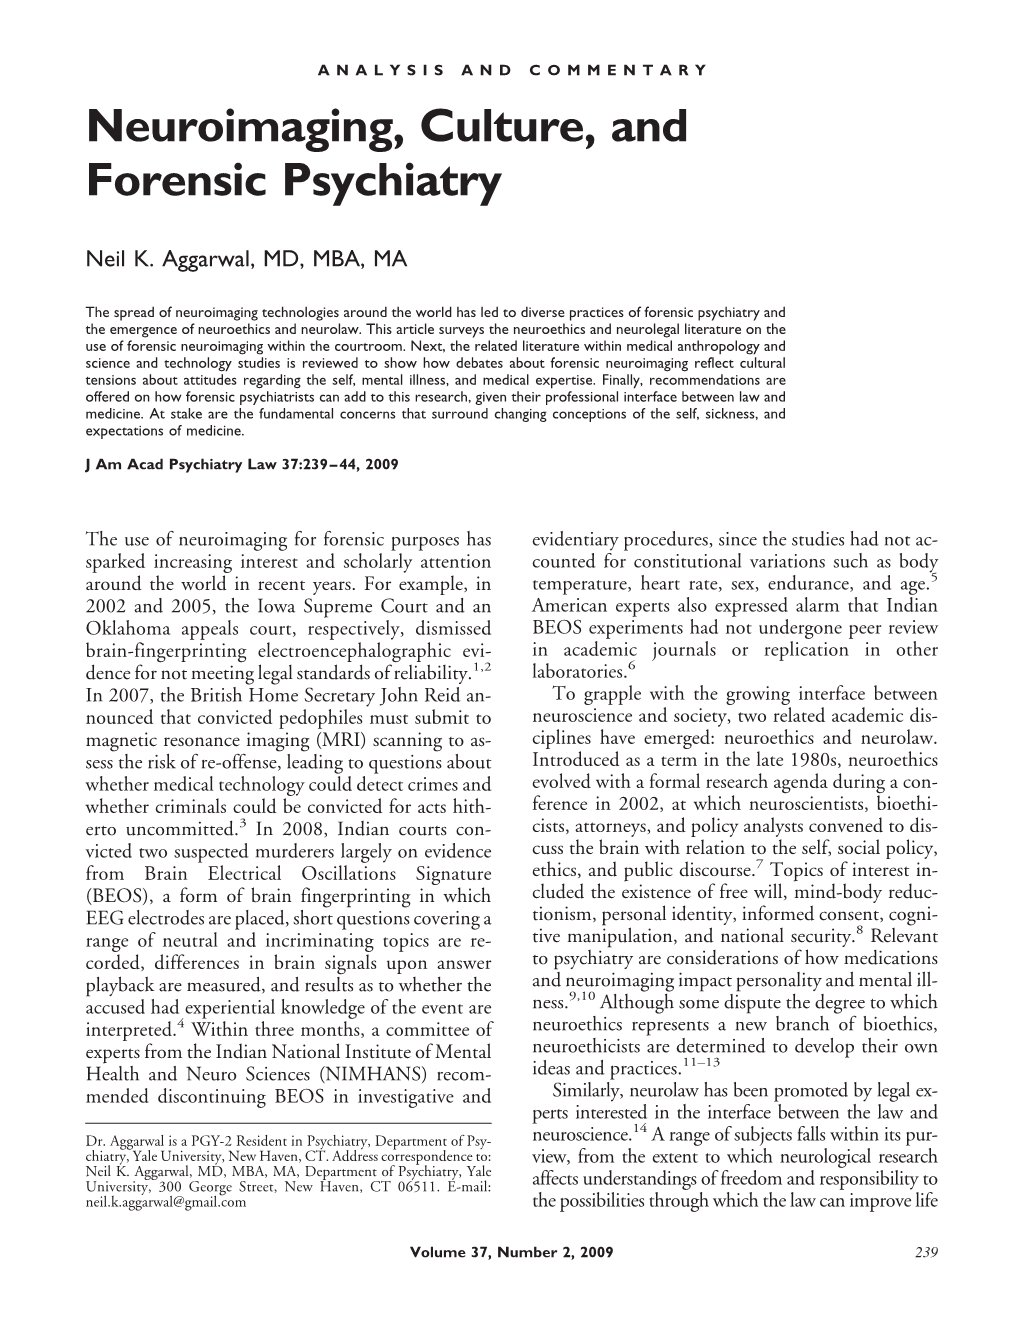 Neuroimaging, Culture, and Forensic Psychiatry